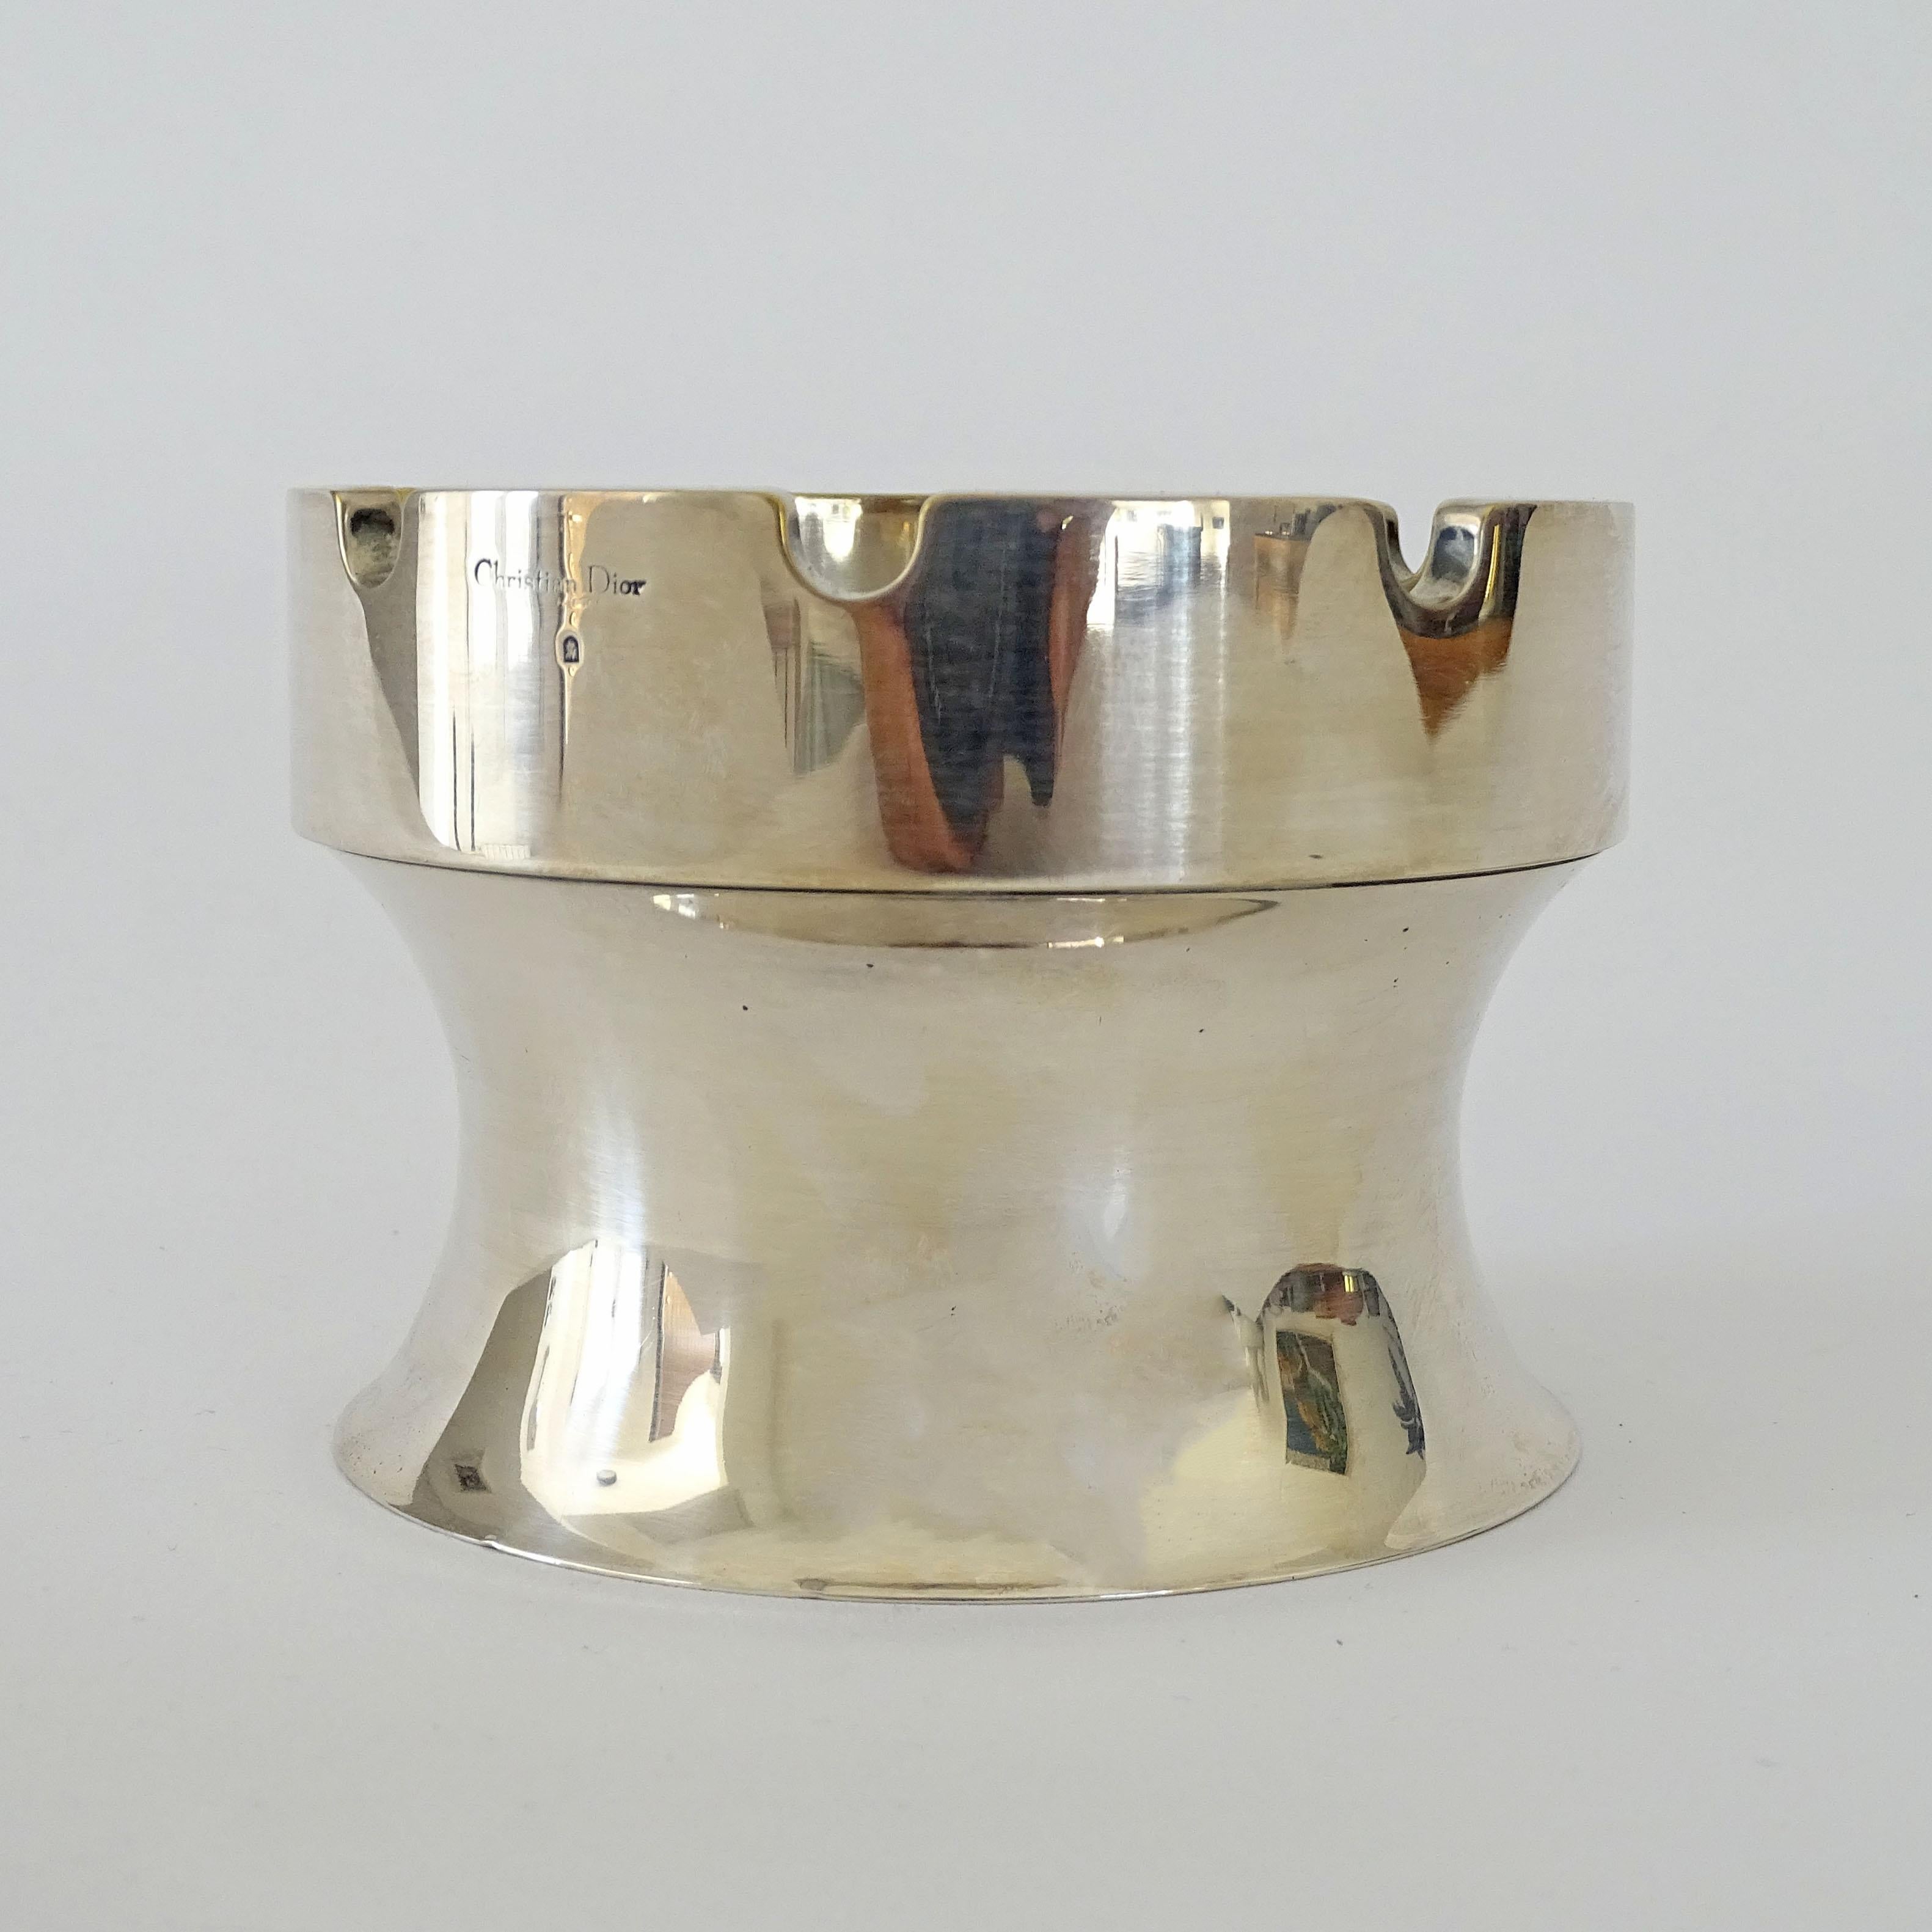 Christian Dior silver metal 
Chess rook shaped Ashtray, France 1960s
Fully marked Christian Dior.